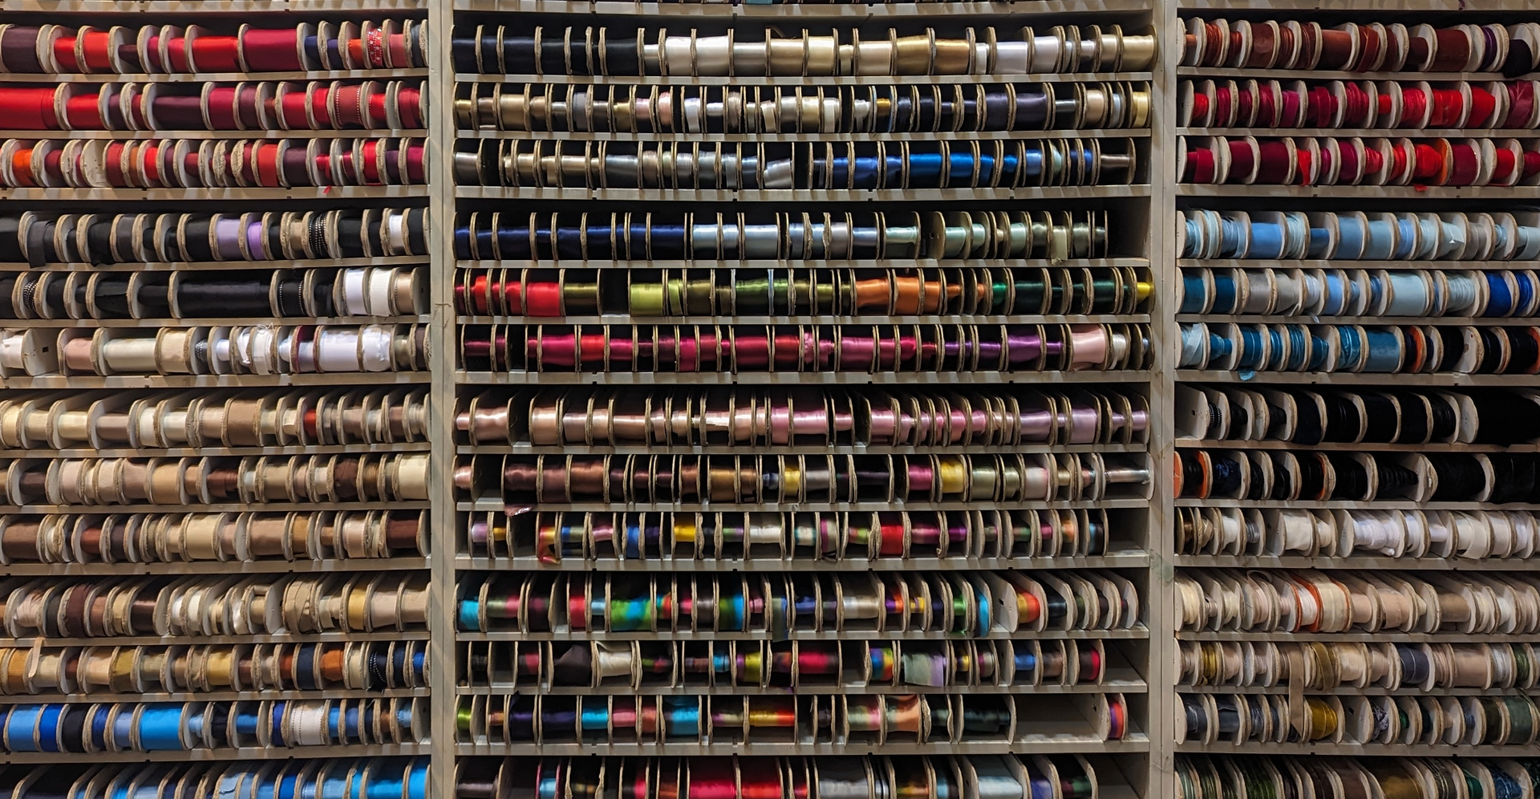 spools of ribbon in many colors